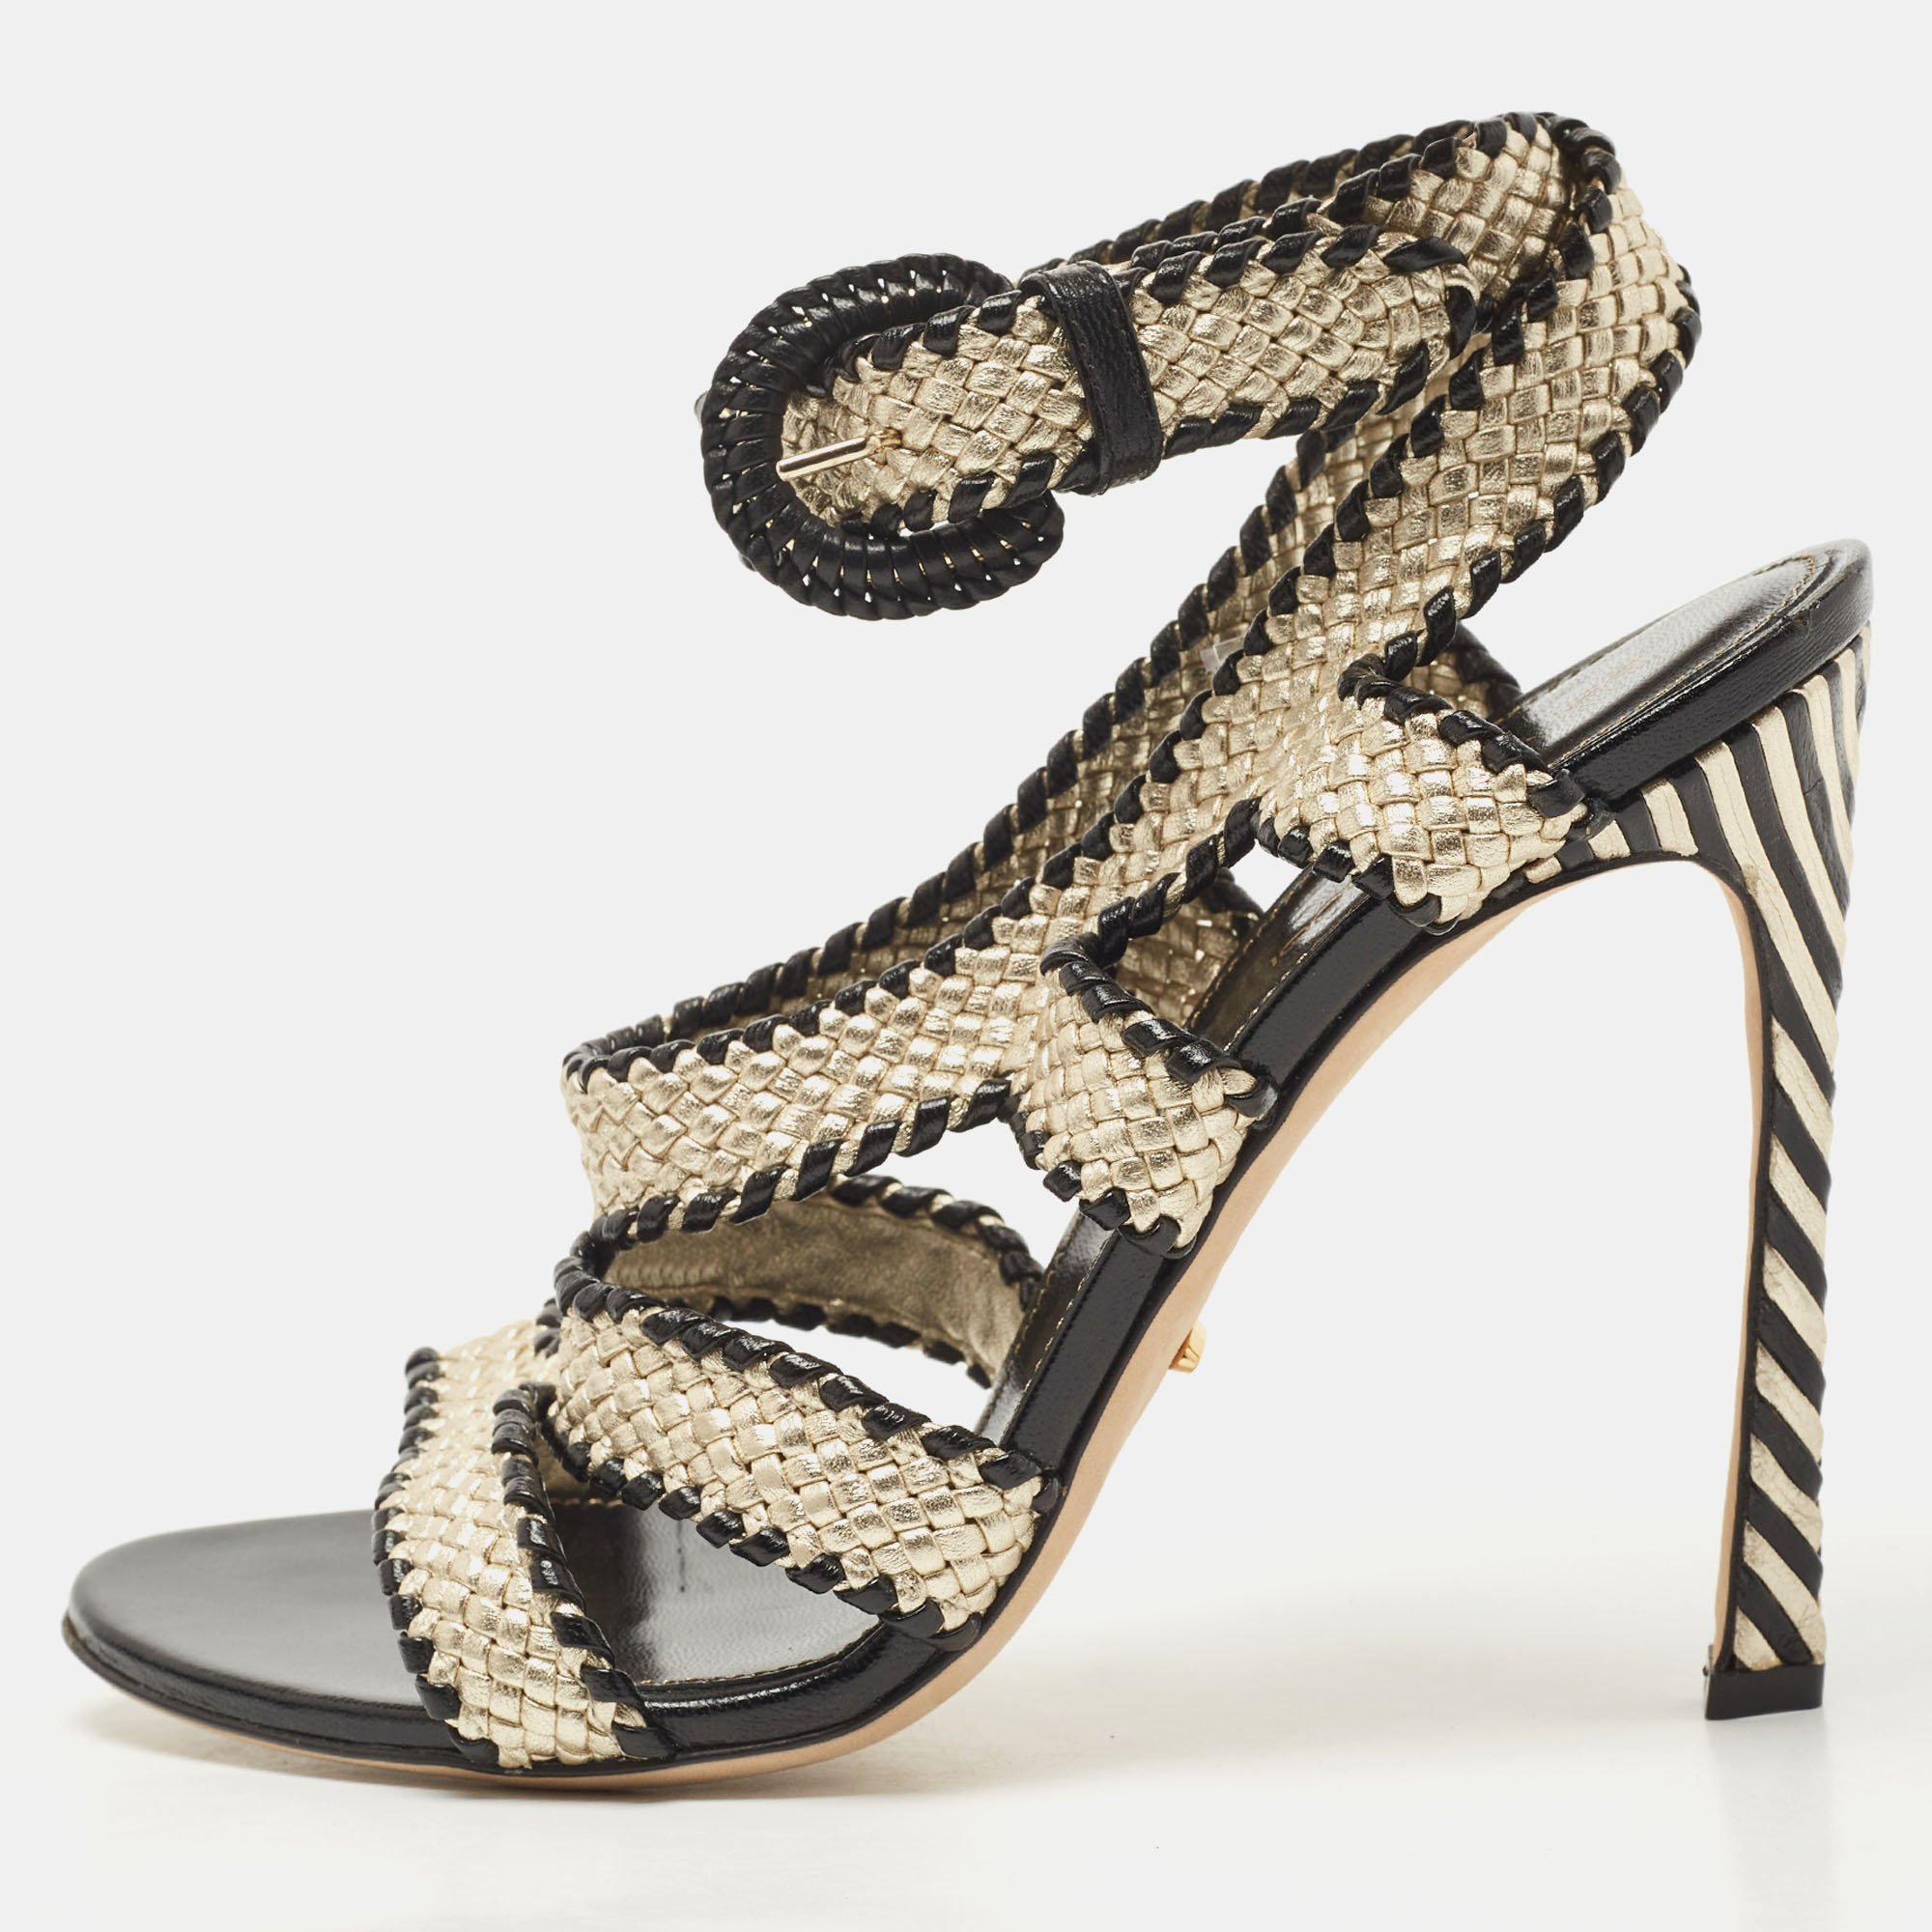 Sergio Rossi Two Tone Woven Leather Ankle Wrap Sandals Size 39